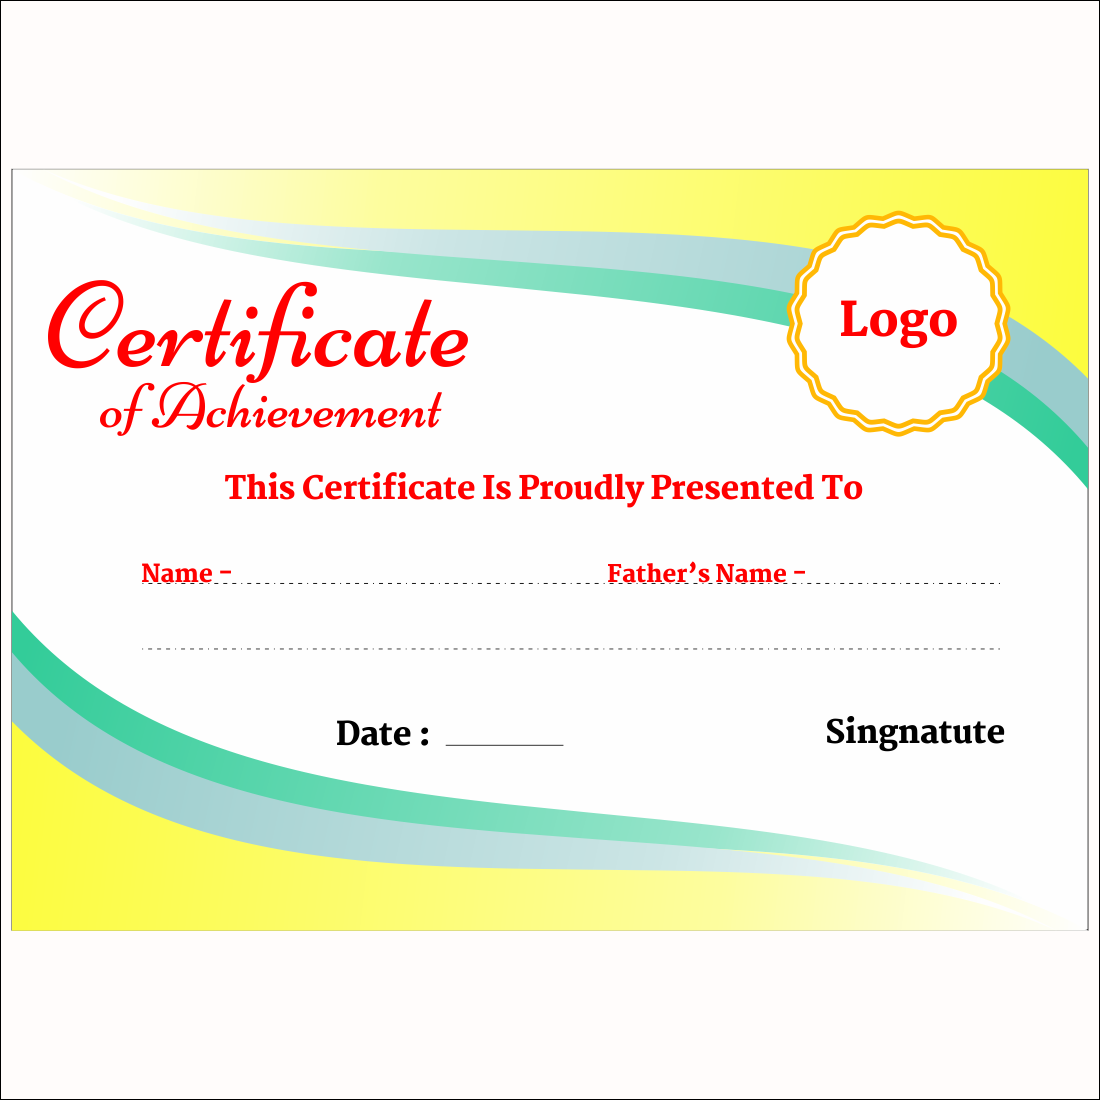 certificate preview image.